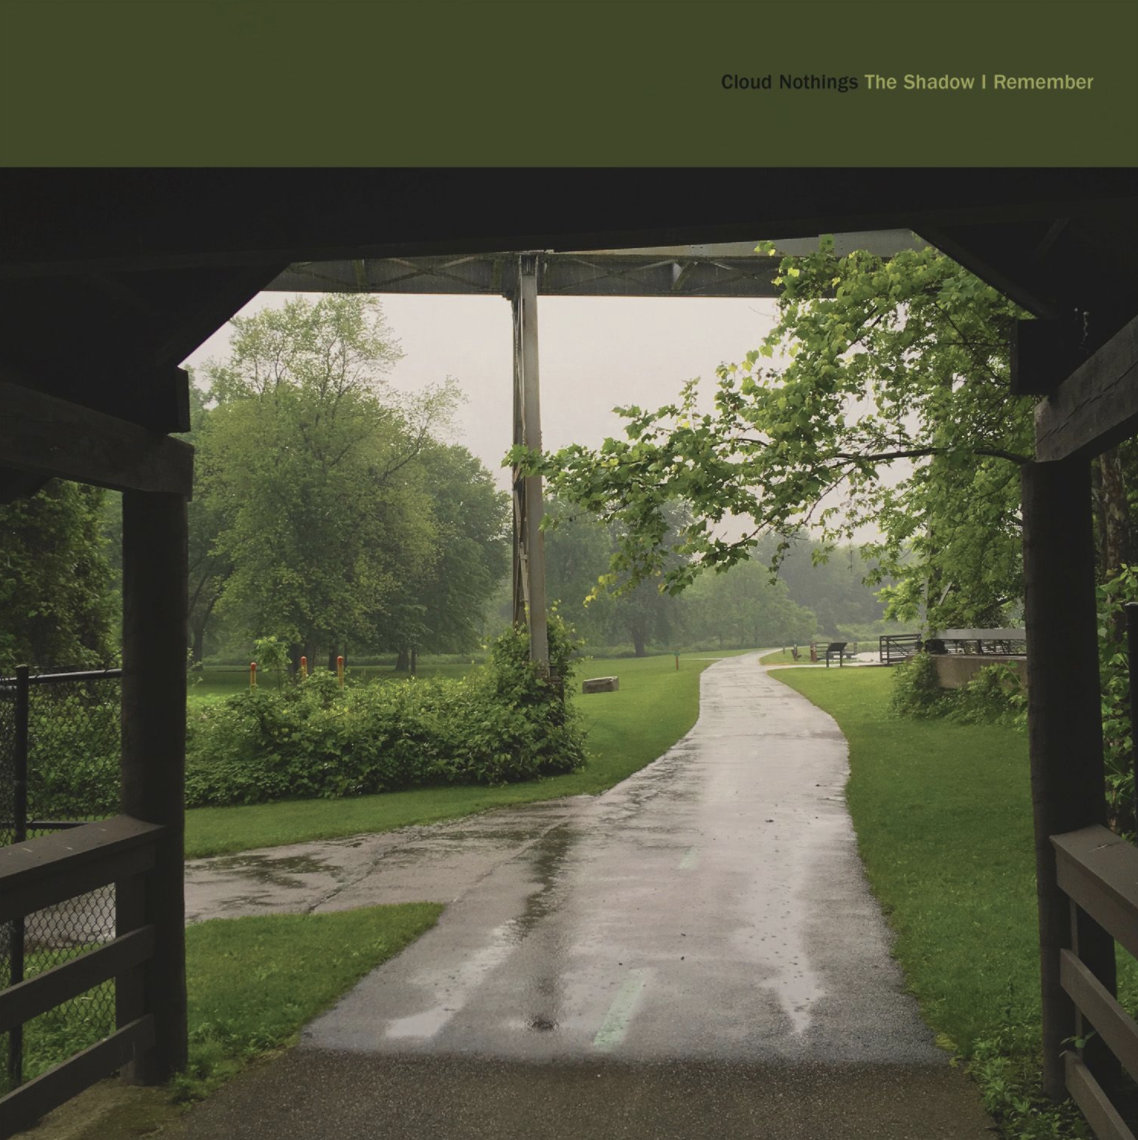 Cloud Nothings Announce New Album <i></noscript>
<p><em><strong>The Shadow I Remember </strong></em><strong>tracklist</strong></p>
<p>1. Oslo</p>
<p>2. Nothing Without You</p>
<p>3. The Spirit Of</p>
<p>4. Only Light</p>
<p>5. Nara</p>
<p>6. Open Rain</p>
<p>7. Sound Of Alarm</p>
<p>8. Am I Something</p>
<p>9. It’s Love</p>
<p>10. A Longer Moon</p>
<p>11. The Room It Was</p>
</div>
</div>
</div>
</div>
</div>
</section>
<section data-particle_enable=